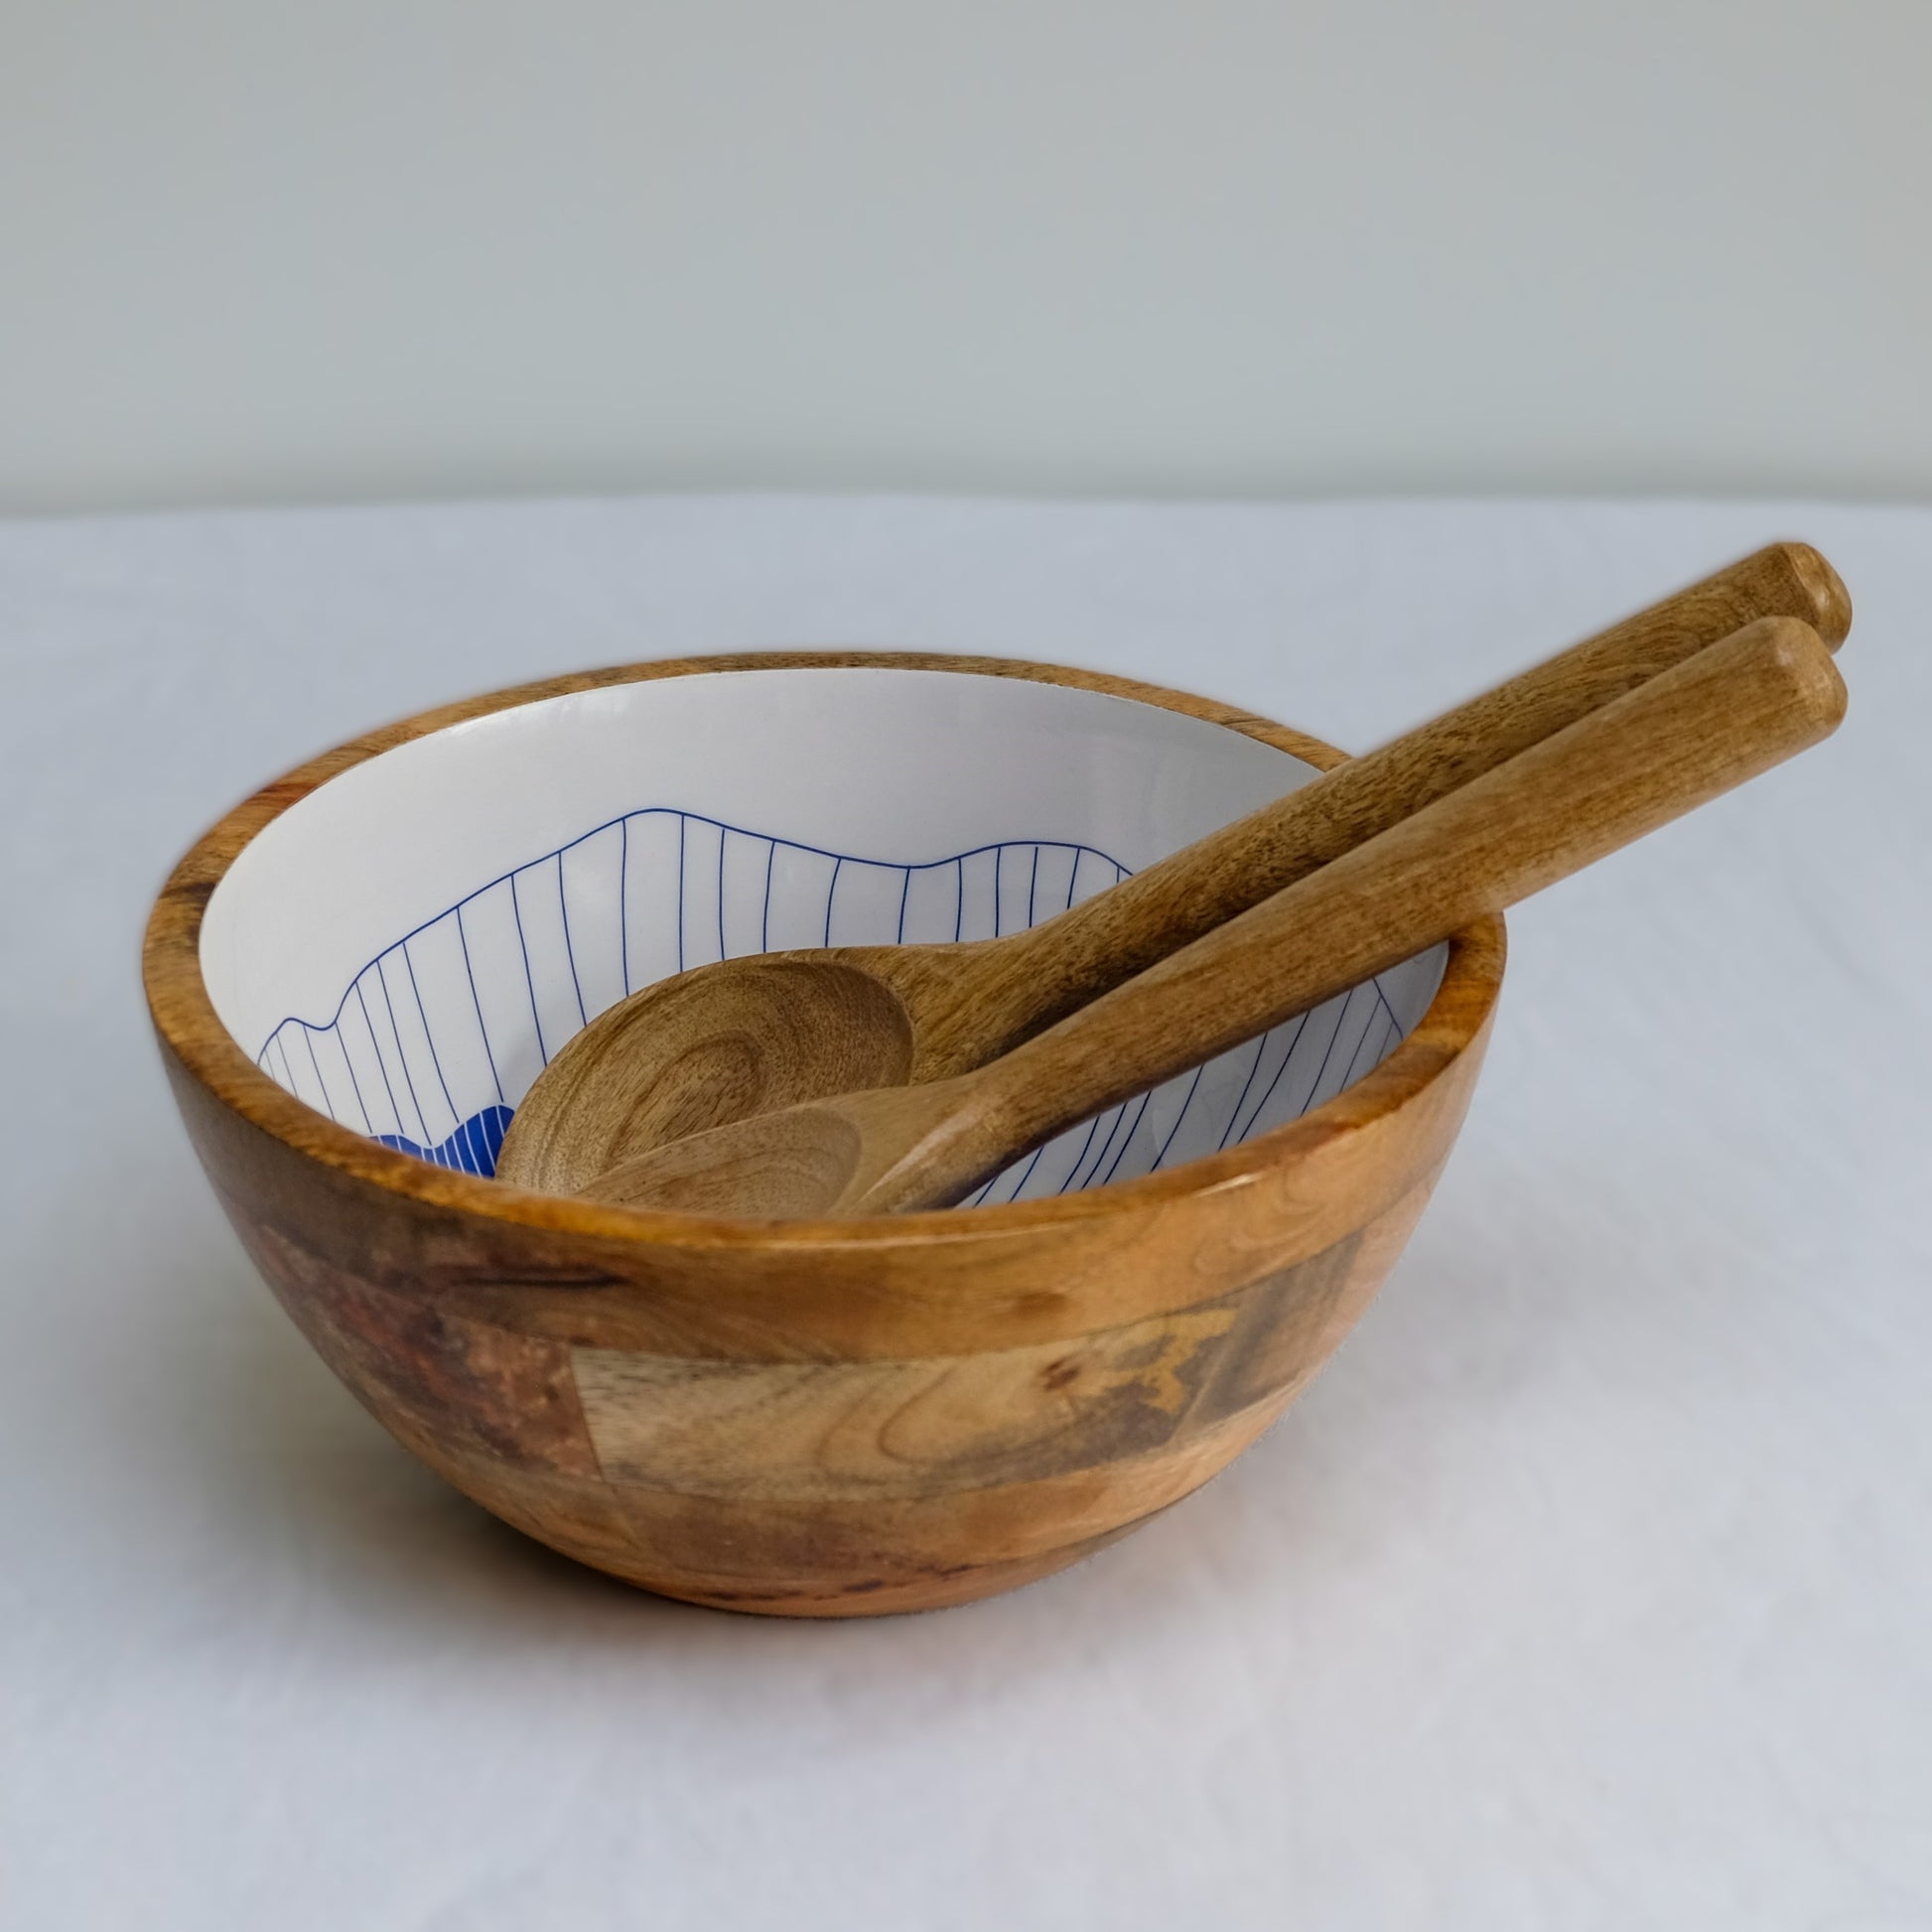 Medium sized bowl (25cm) with a blue & white sea-inspired design. Made with sustainable mango wood. Suitable as a stylish fruit bowl or salad bowl with matching servers.